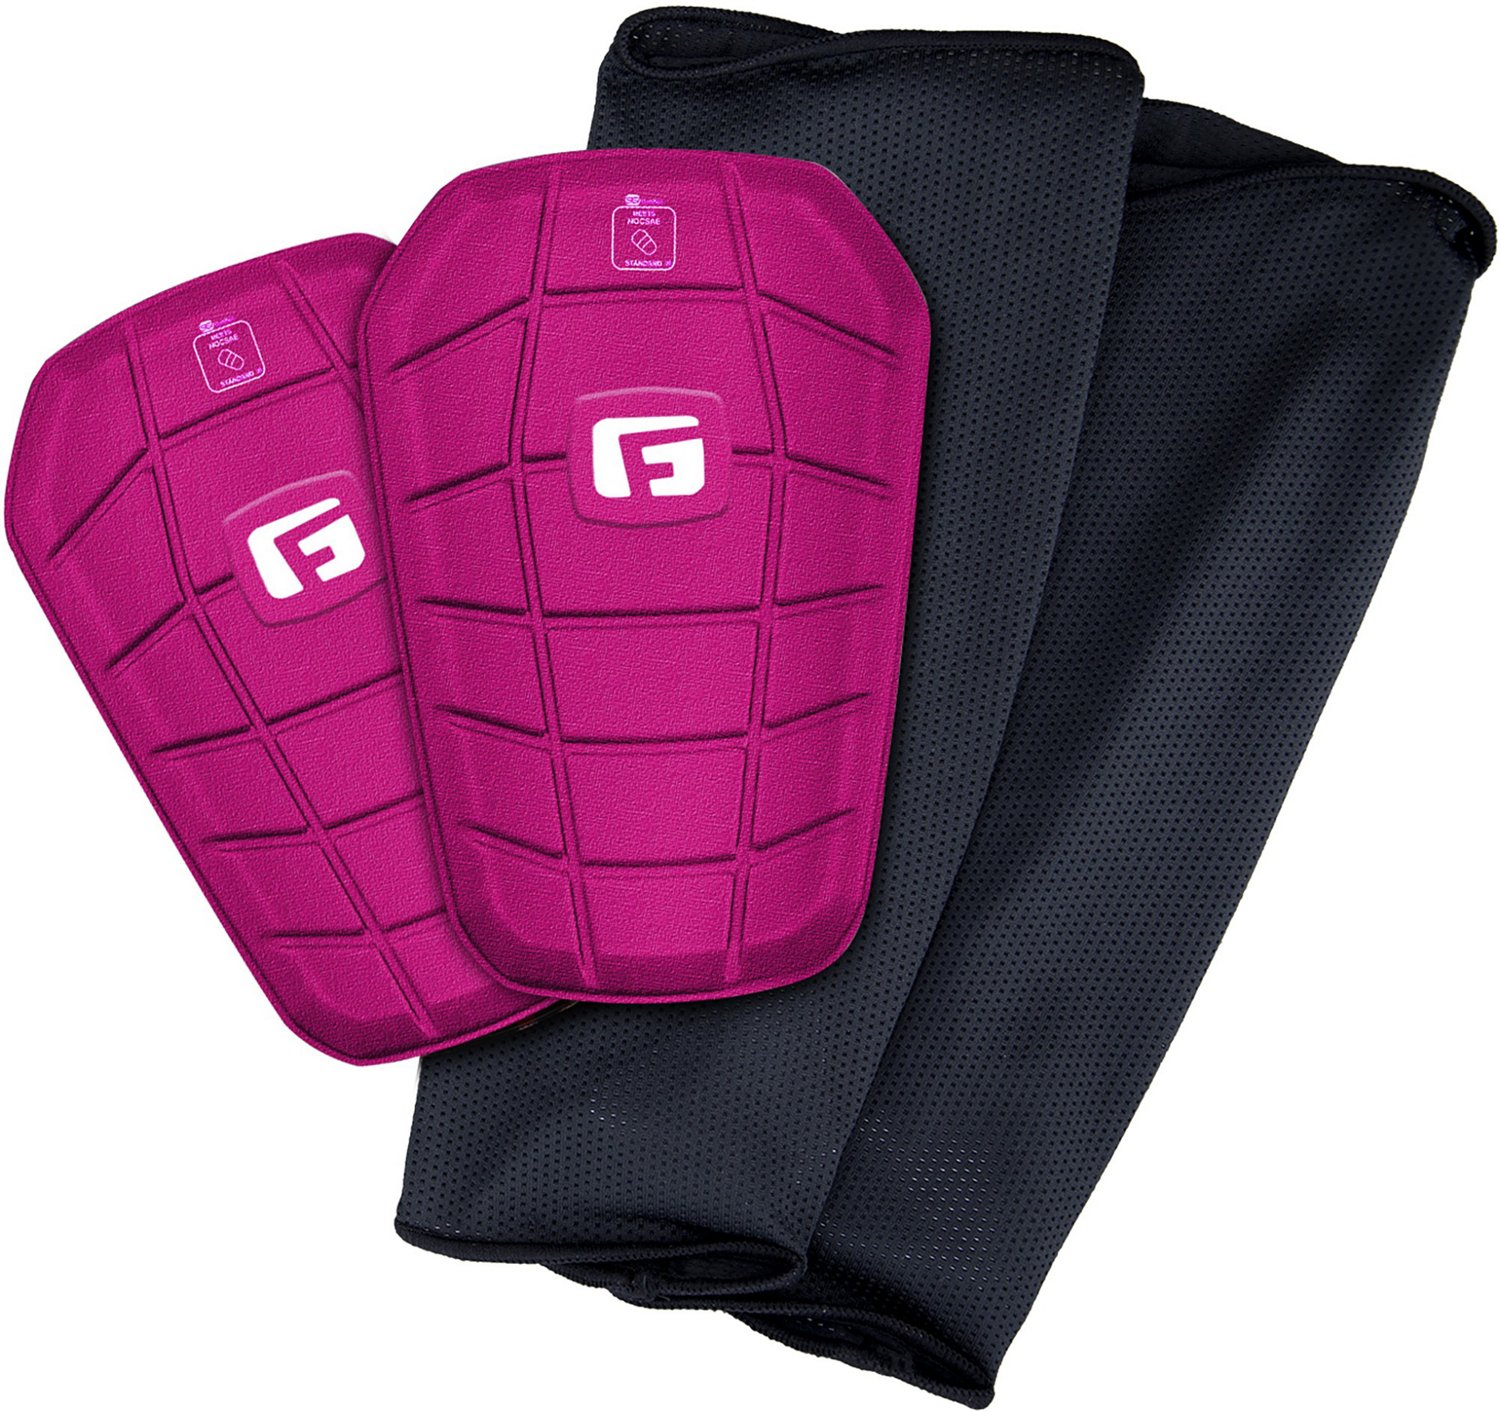 G-FORM Adults Pro-S Shin Guards